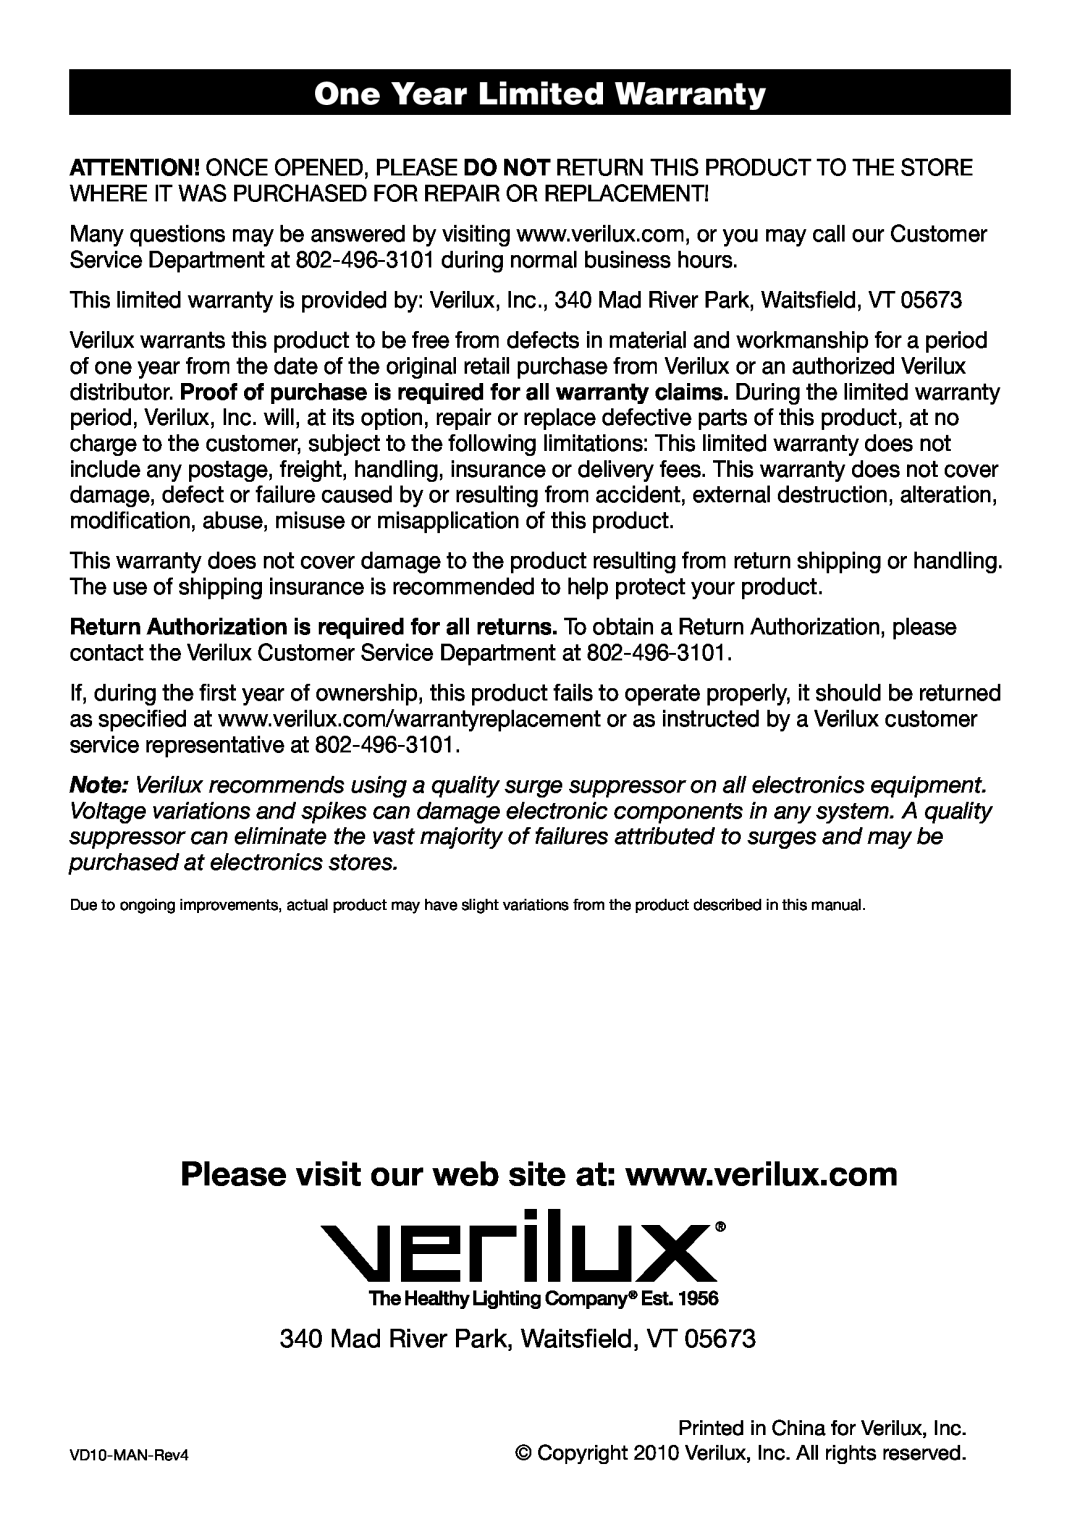 Verilux VD10 manual One Year Limited Warranty 